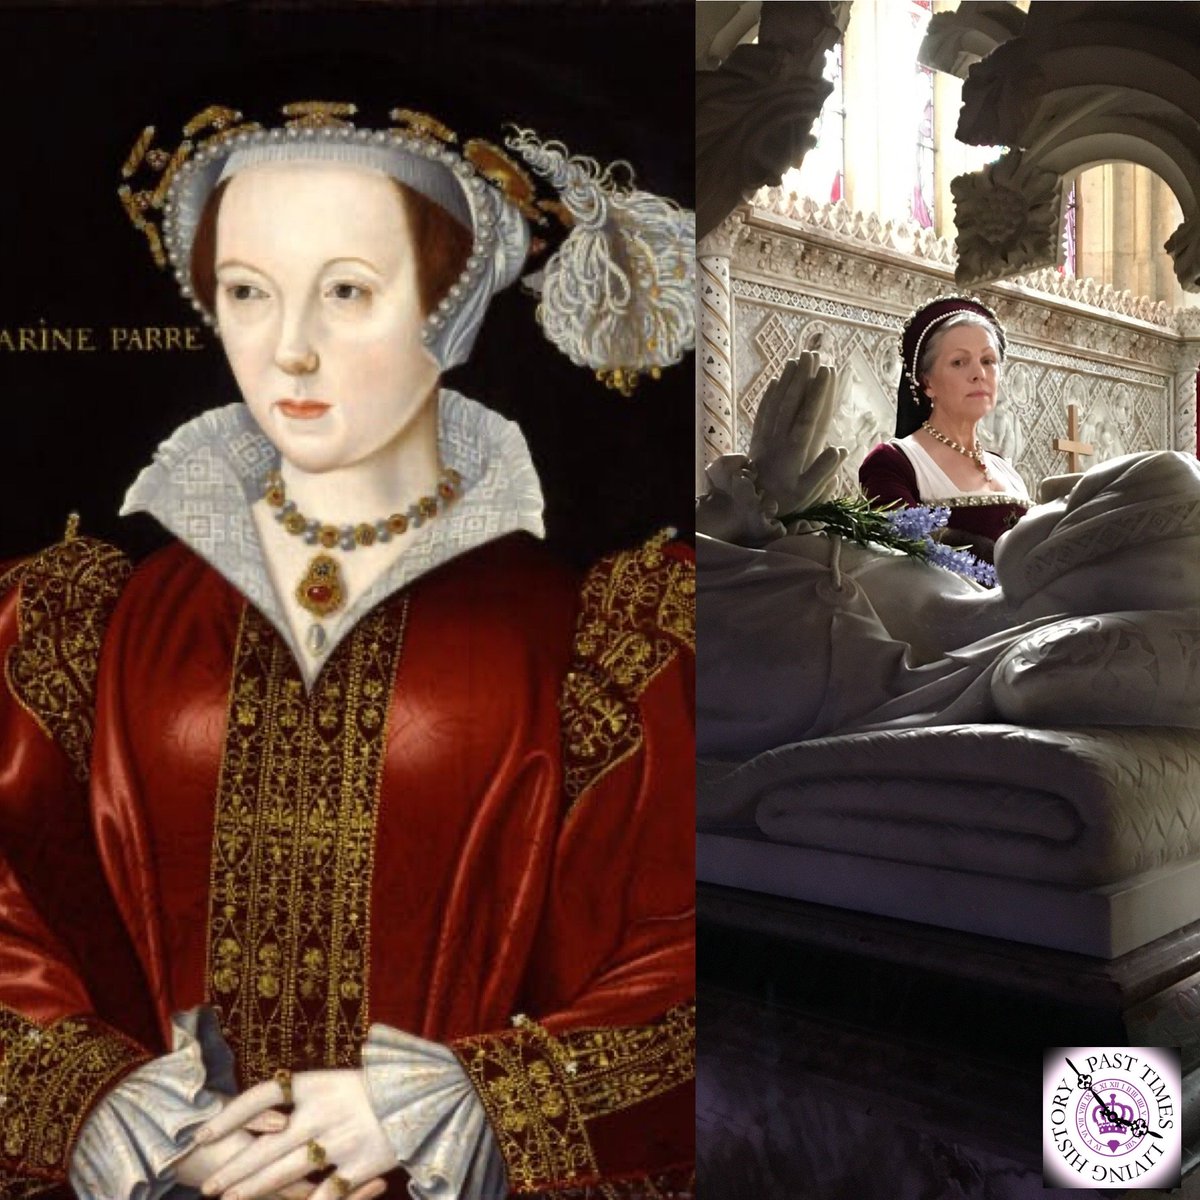 #OTD 25 Apr 1544 #KatherineParr anonymously published her 1st book Psalms or Prayers Her next 2 Prayers or Meditations Lamentations of a Sinner were published under her name becoming the 1st published Woman & only Queen of England to do so @SudeleyCastle @LizFremantle #Firebrand